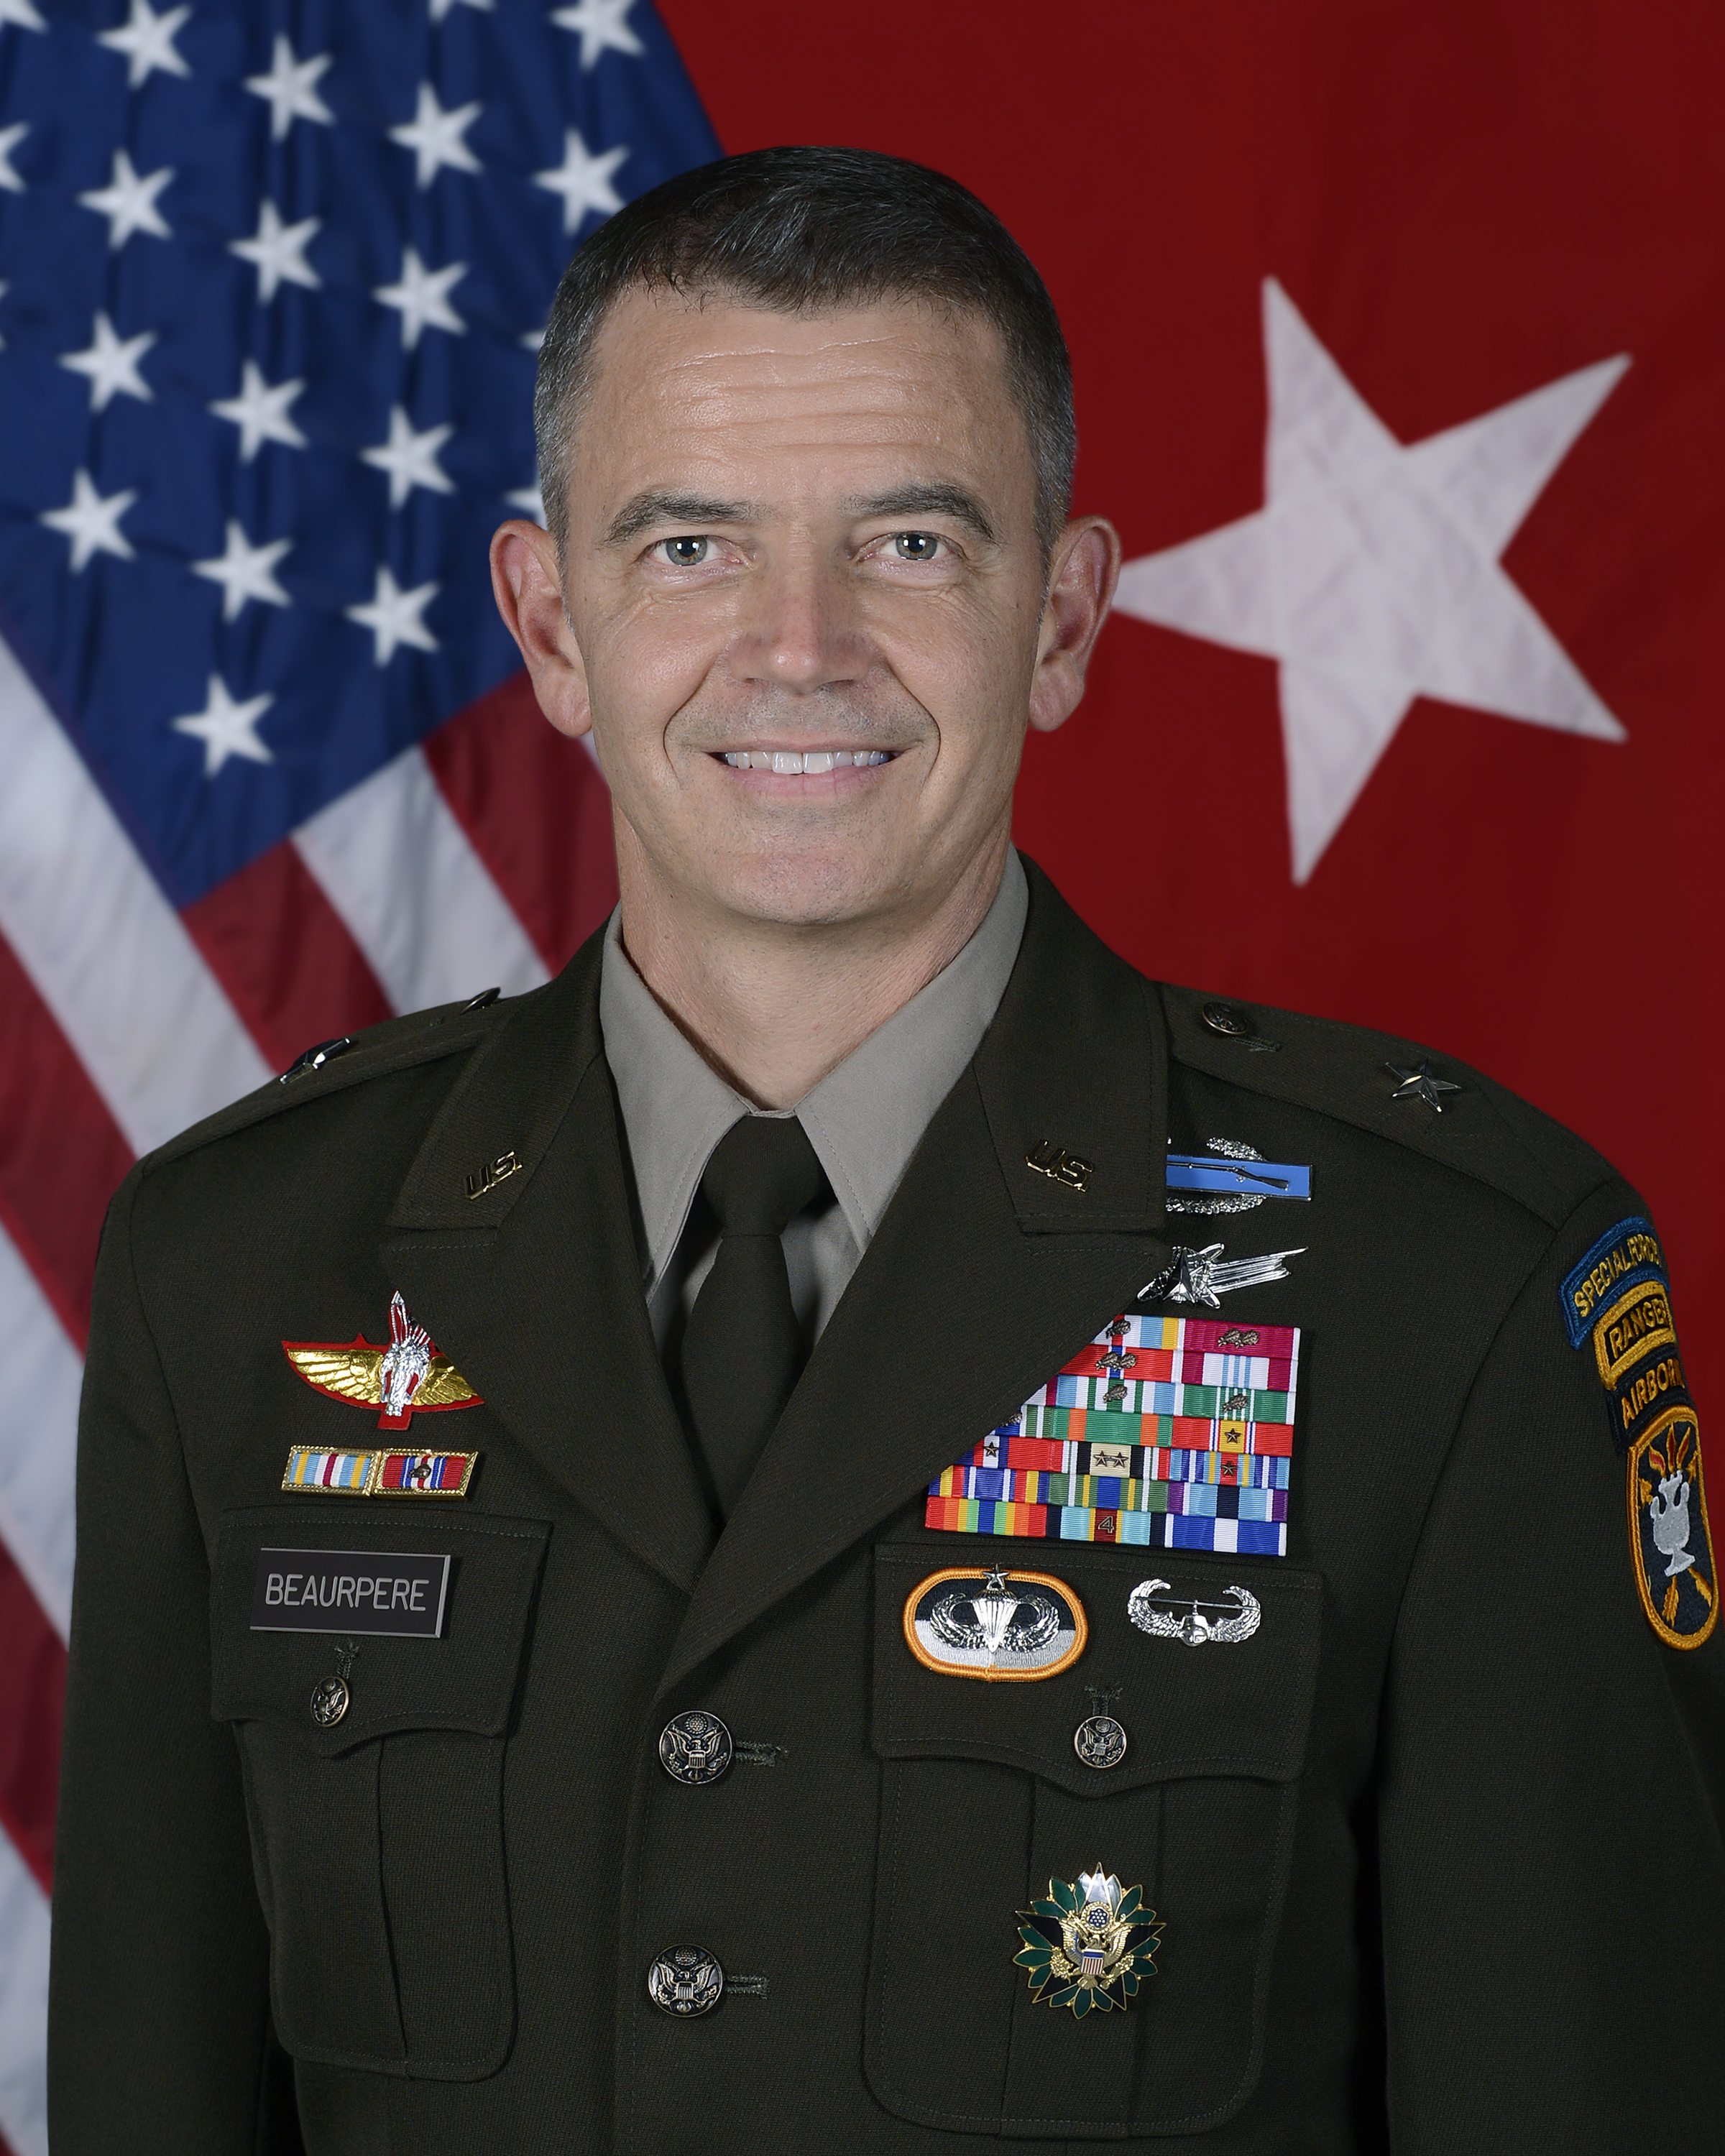 Commanding General Brigadier General Guillaume "Will" Beaurpere